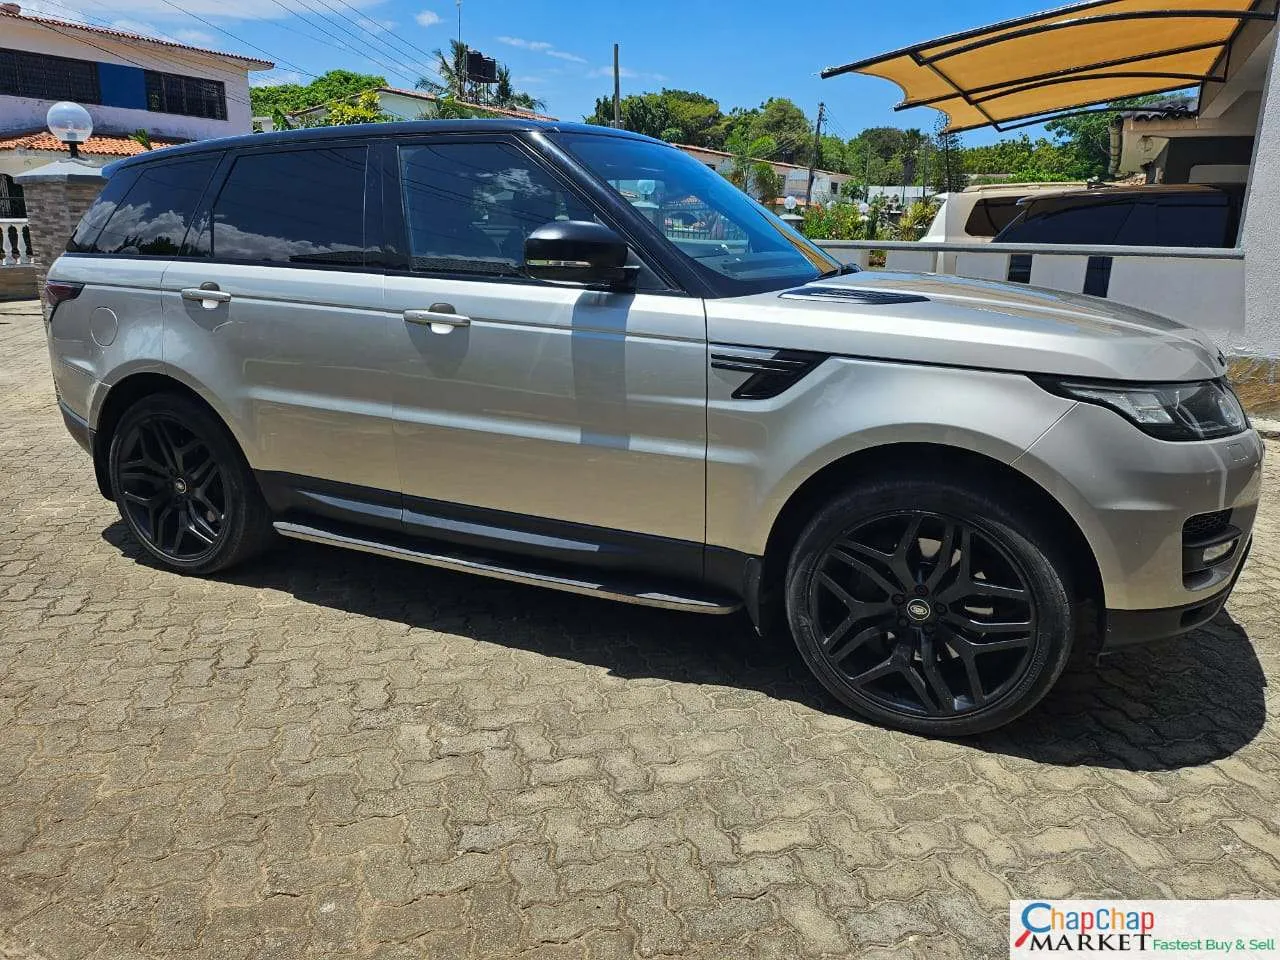 Range Rover Sport kenya JUST ARRIVED CHEAPEST You pay 30% deposit Trade in OK sport for sale in kenya hire purchase installments EXCLUSIVE